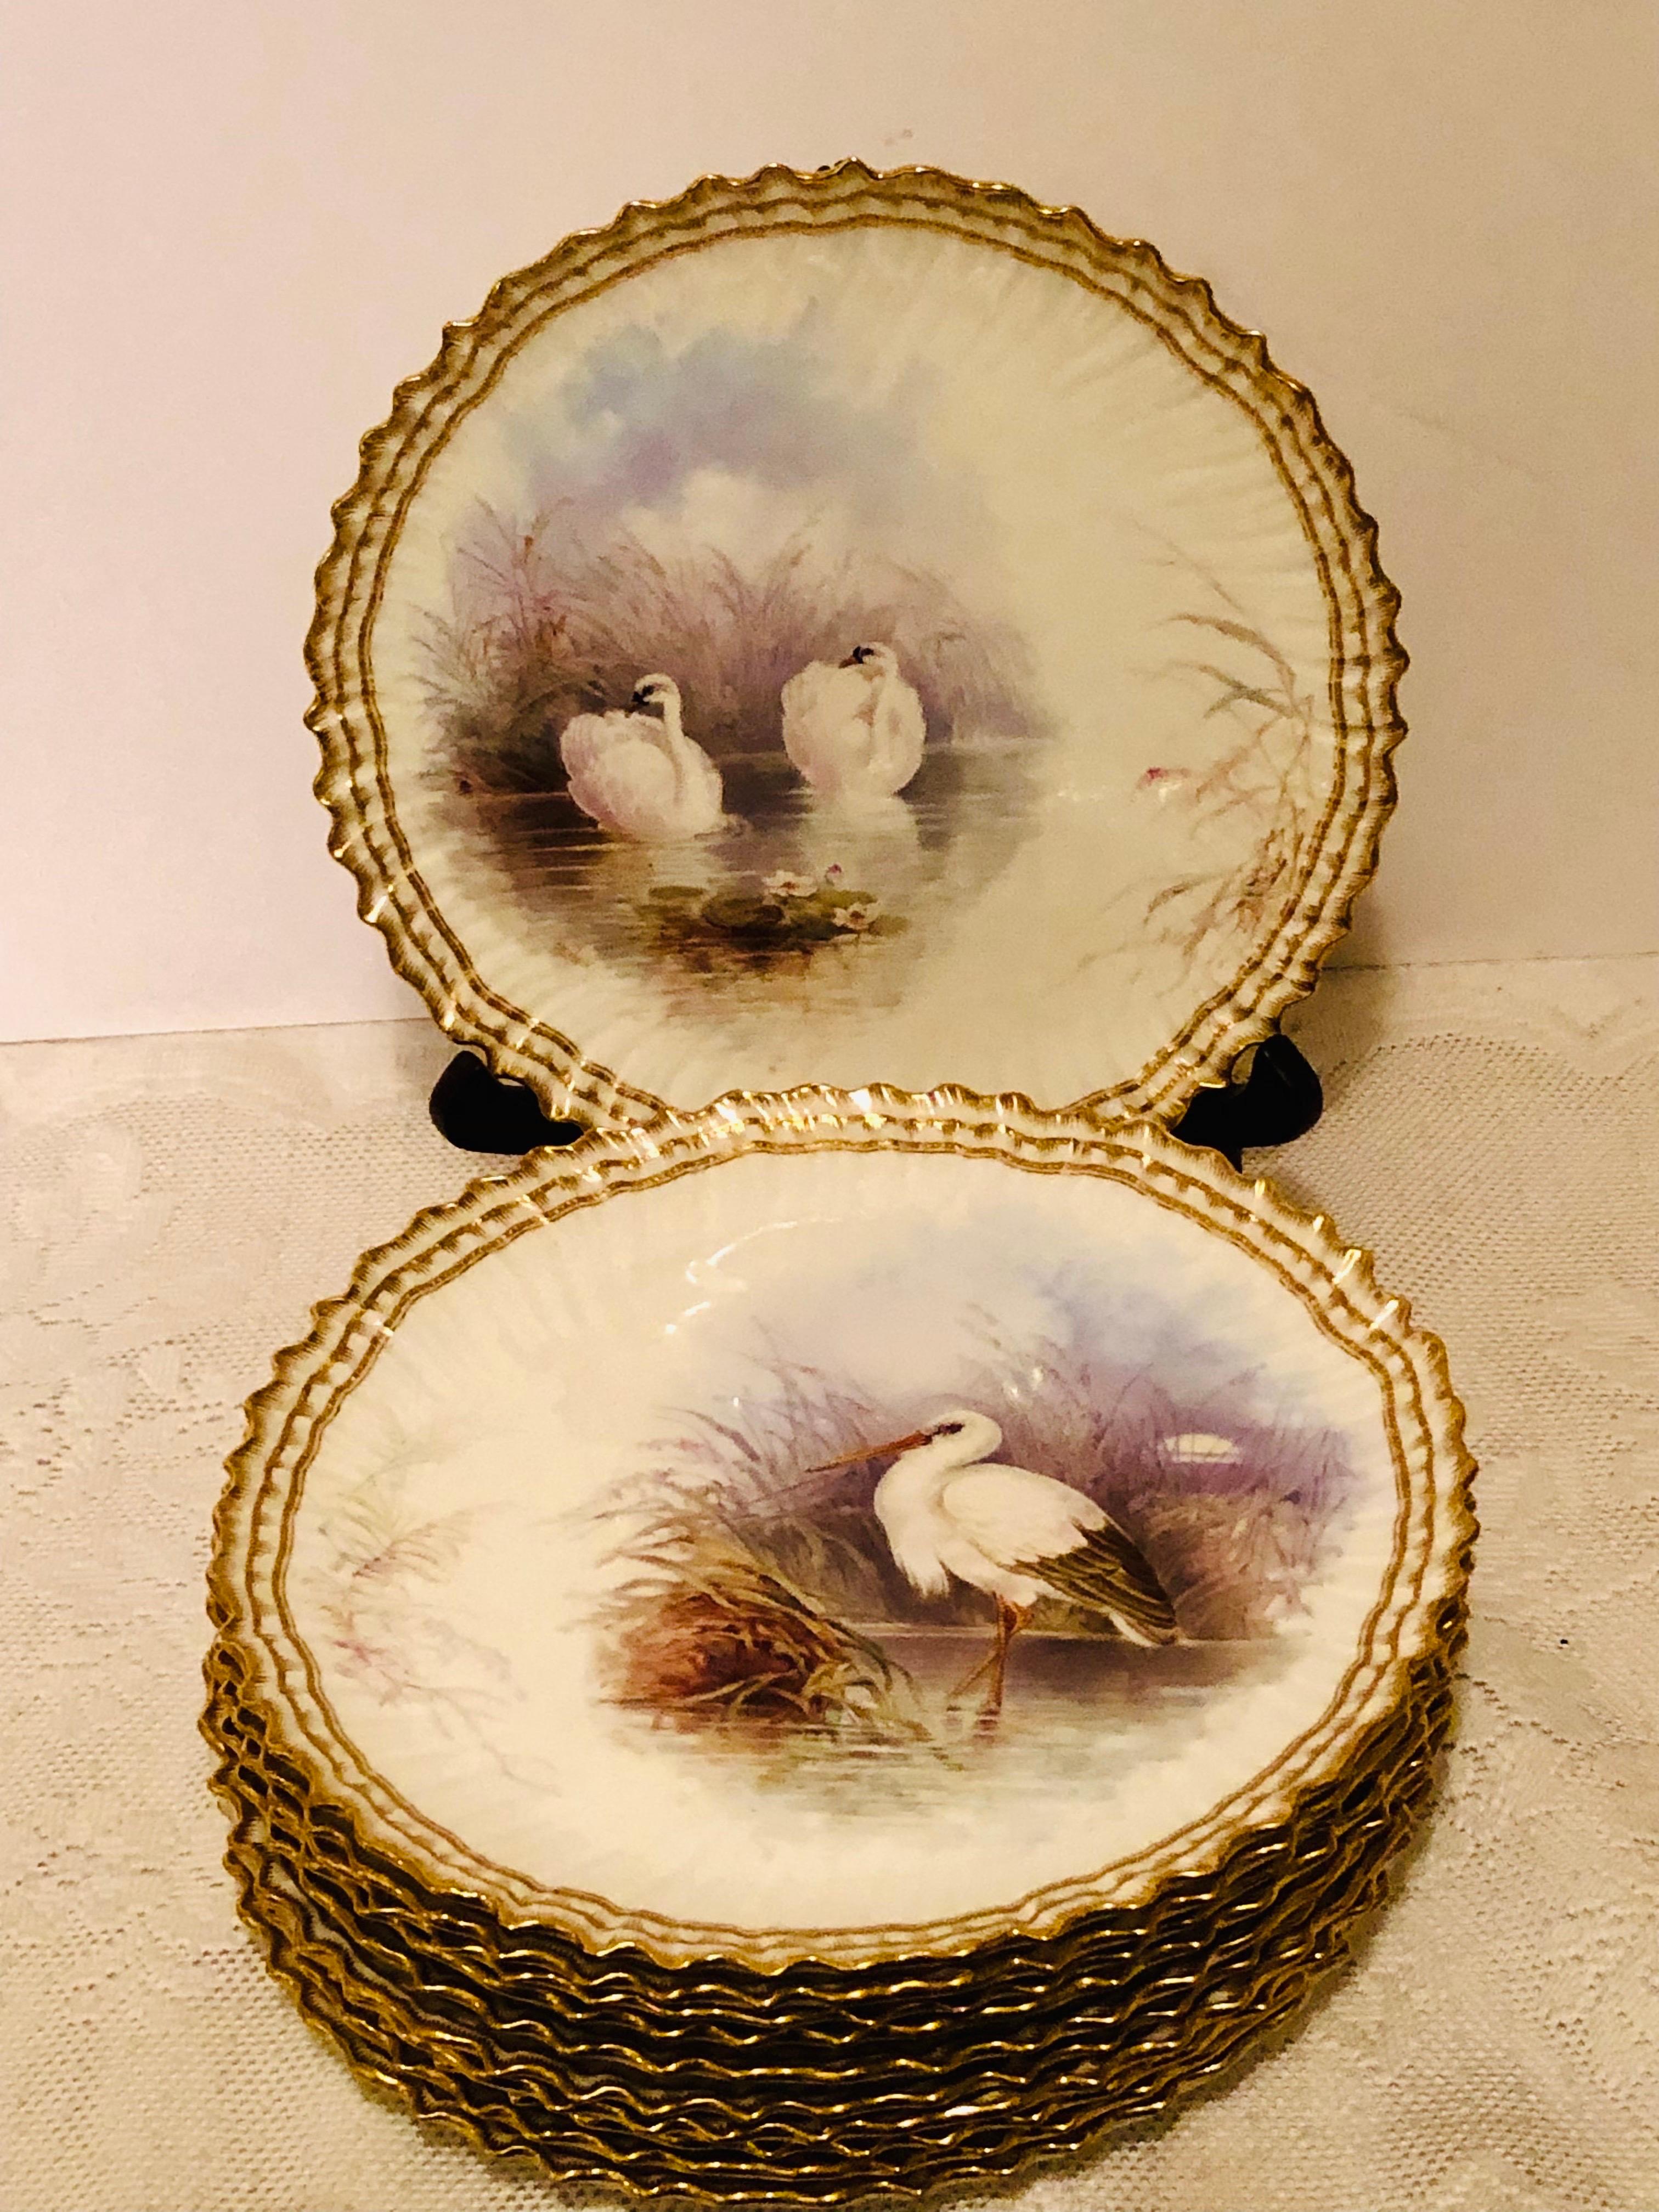 I want to offer you this rare set of bird plates that are each painted differently with gorgeous bird paintings of rare birds like swans and flamingos and many others. If you look through the pictures, you will be amazed of the artistic talent of